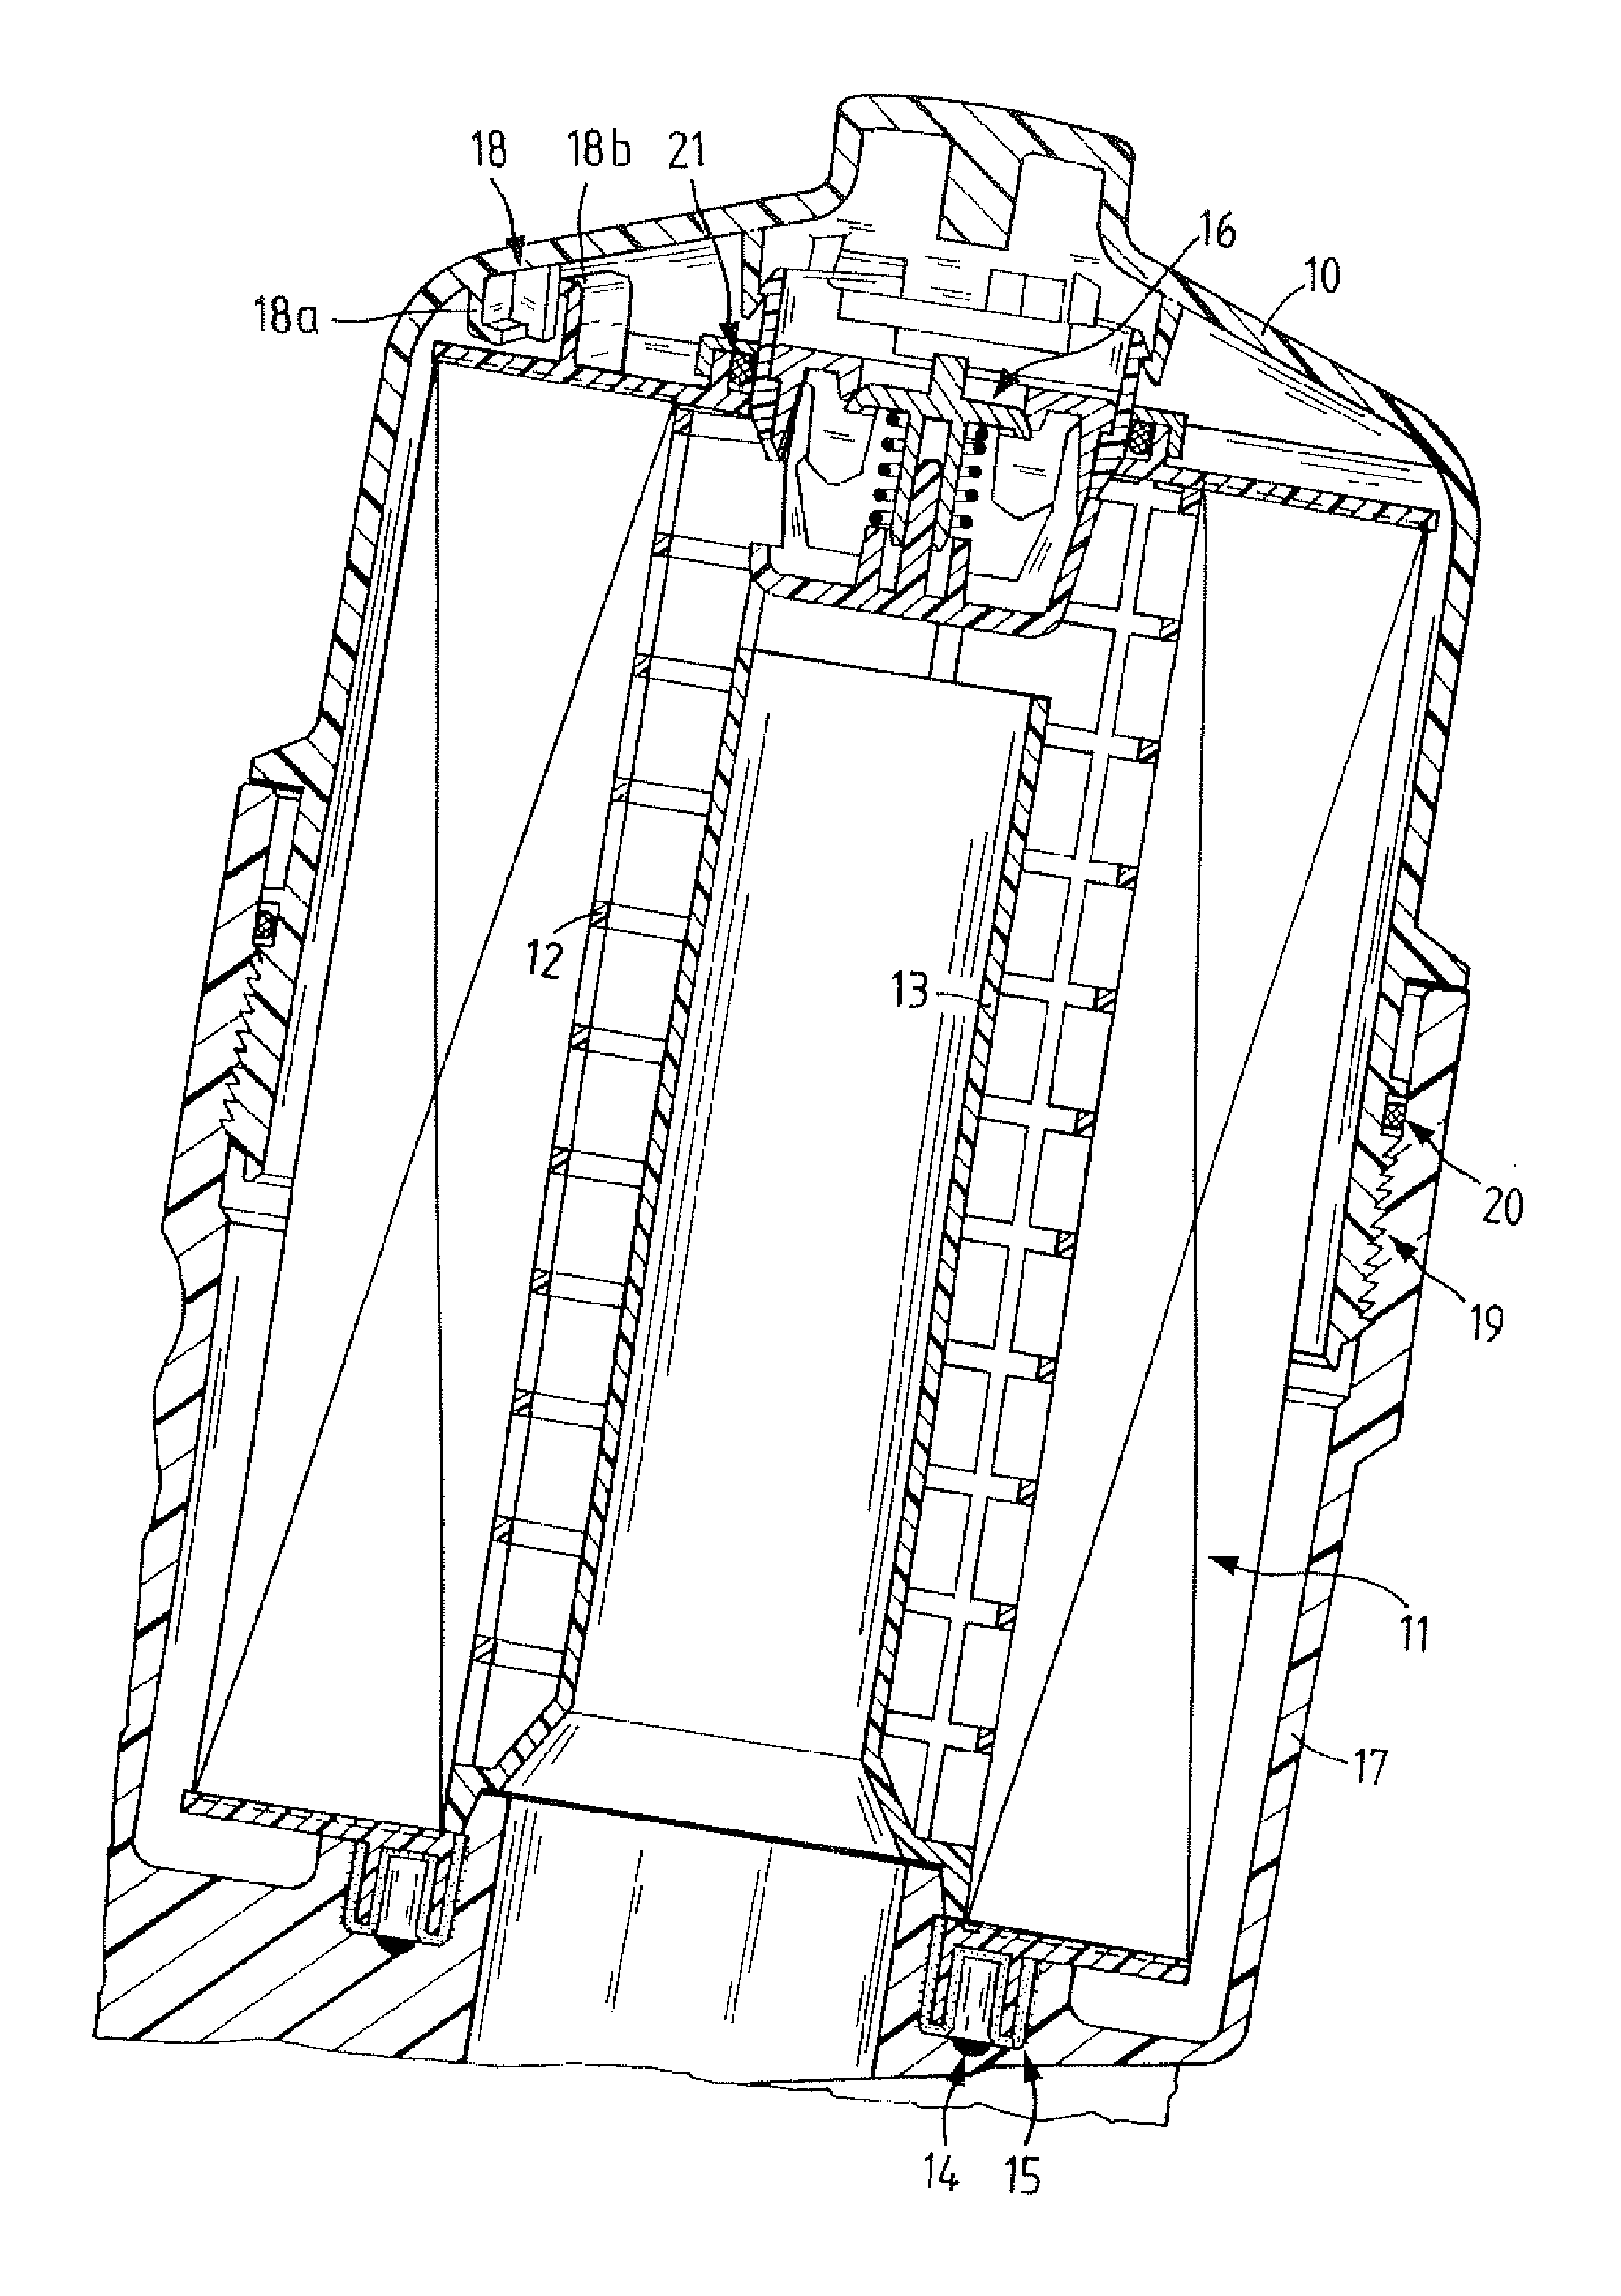 Filter with bayonet coupling to cover